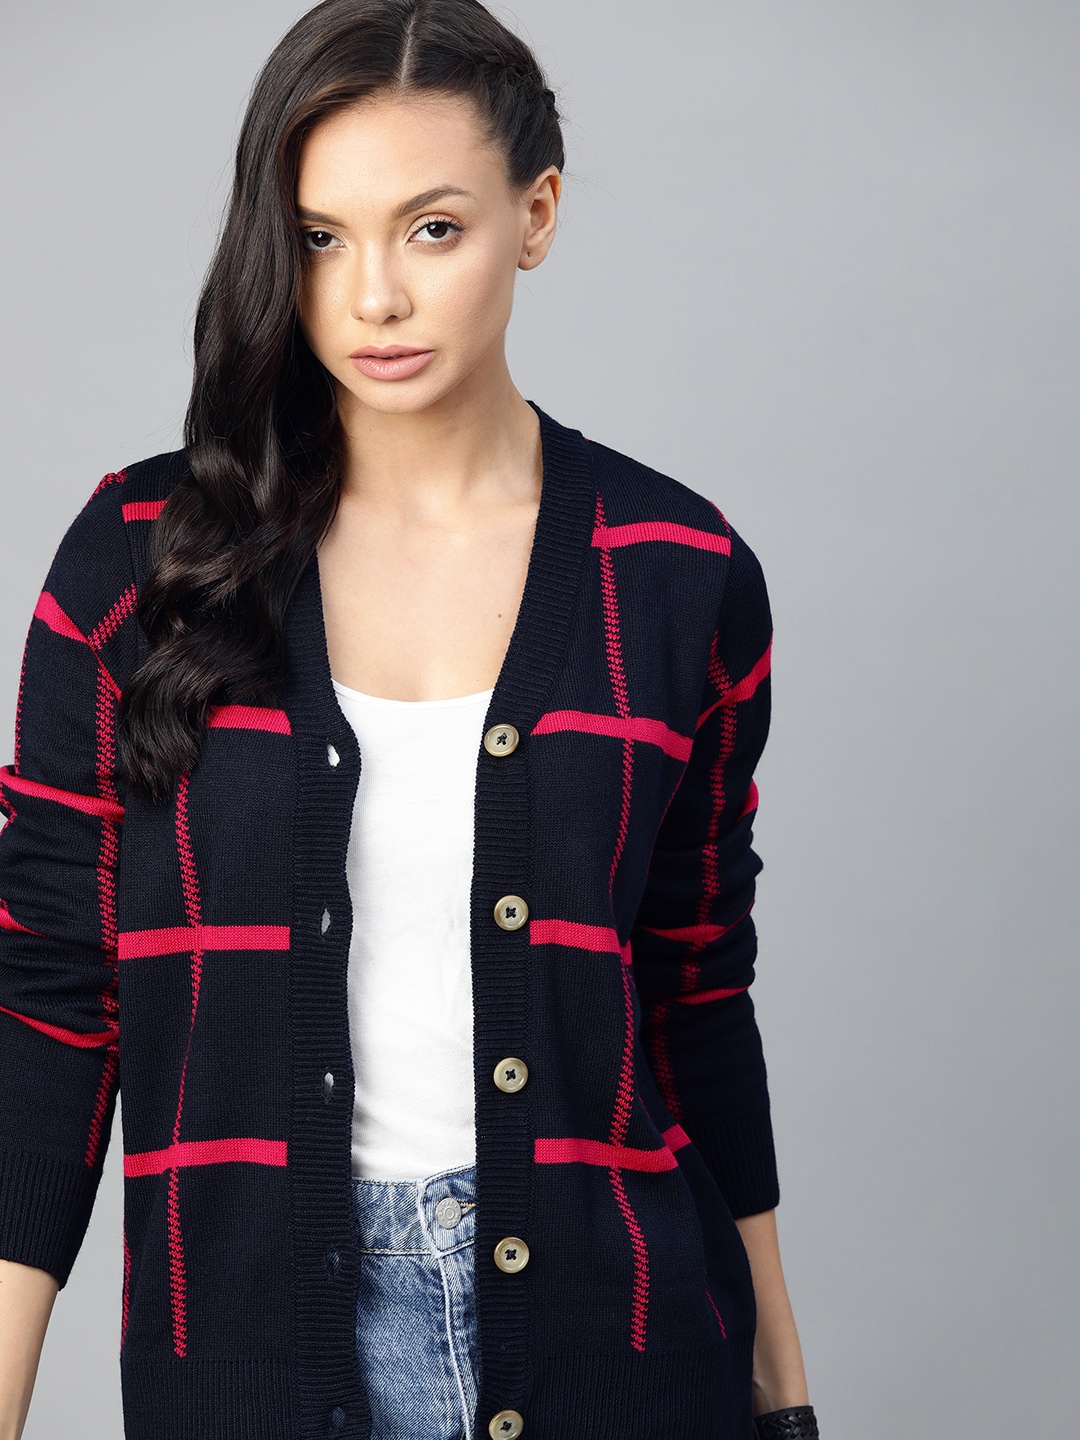 The Roadster Lifestyle Co Women Black & Red Checked Cardigan Price in India